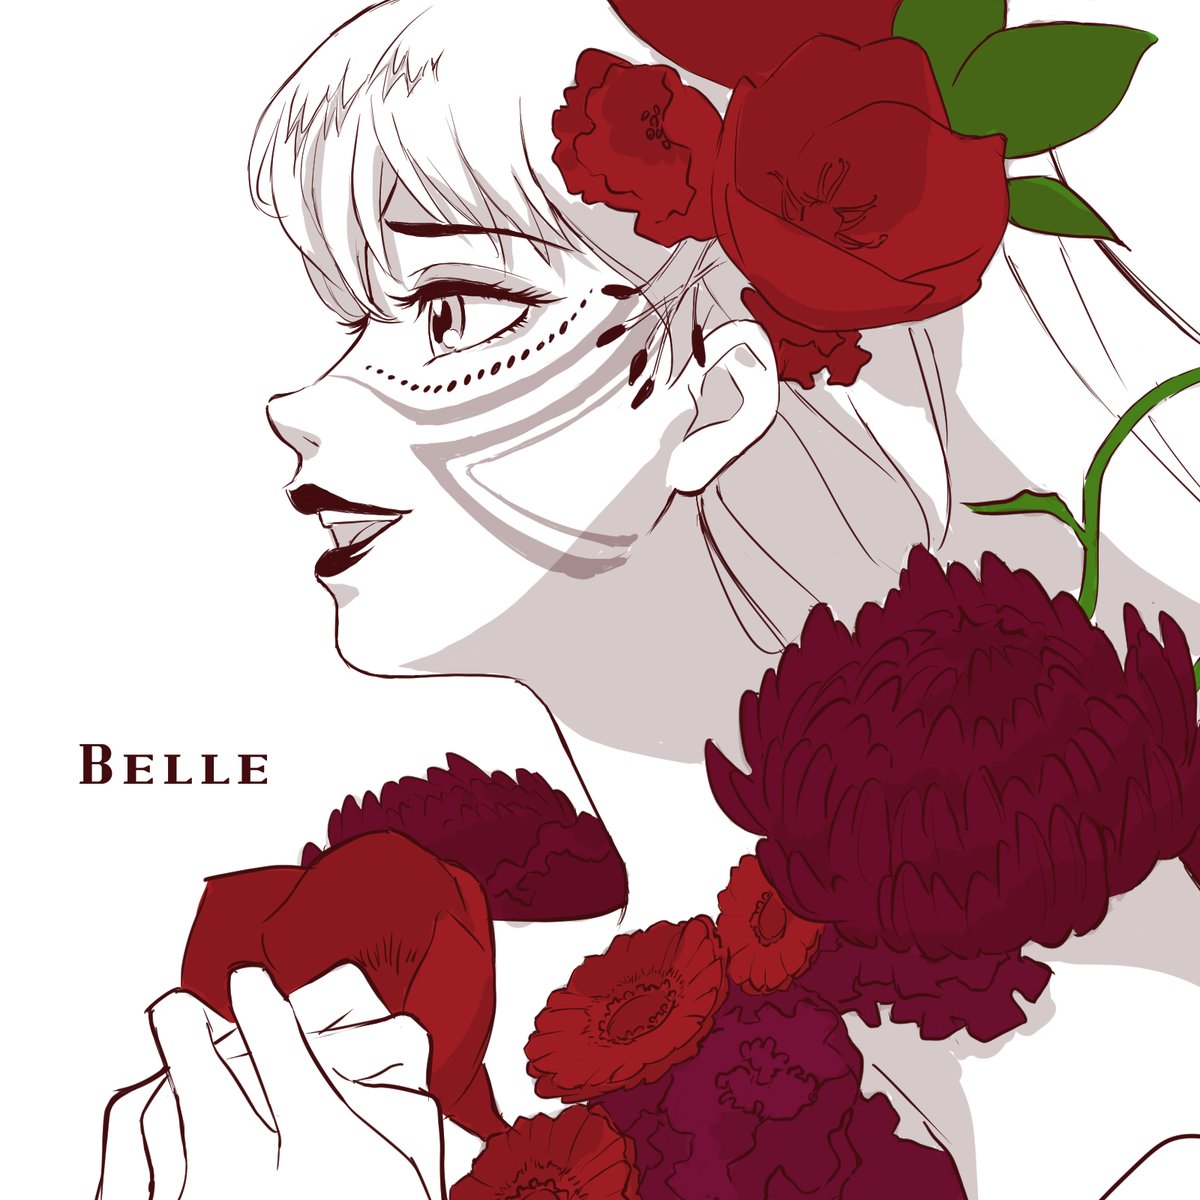 Studio Chizu Music From Studiochizu S New Film Belle Is Now On Spotify Check It Out Here T Co Obcaxevgro The Playlist Features Songs Written By Director Mamoruhosoda Kahonakamura As